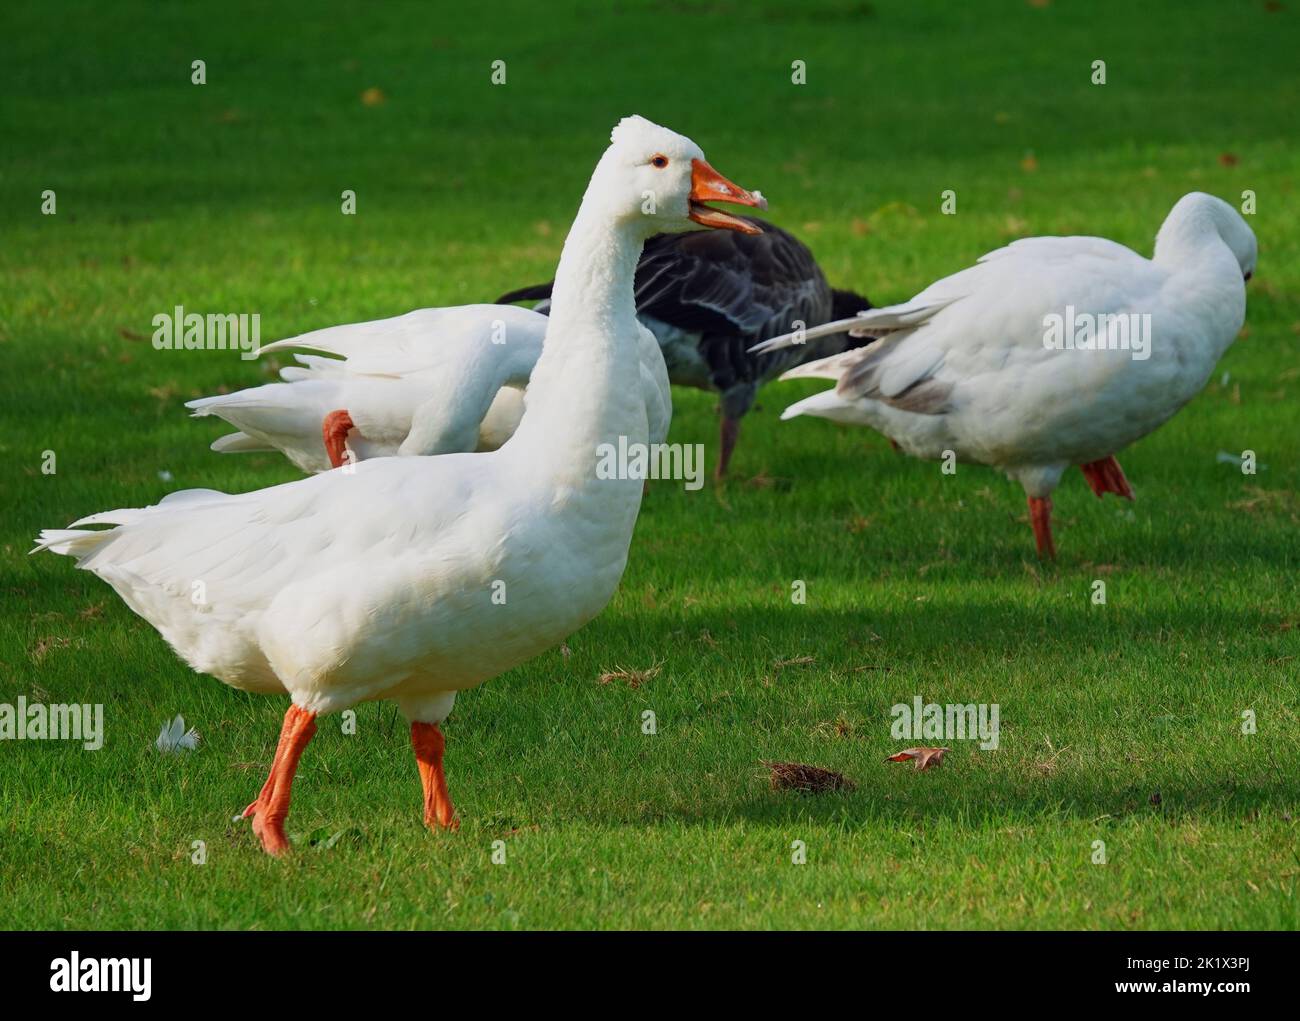 Complaining white domestic goose on a meadow in front of three other geese. Location: Hardenberg, the Netherlands Stock Photo